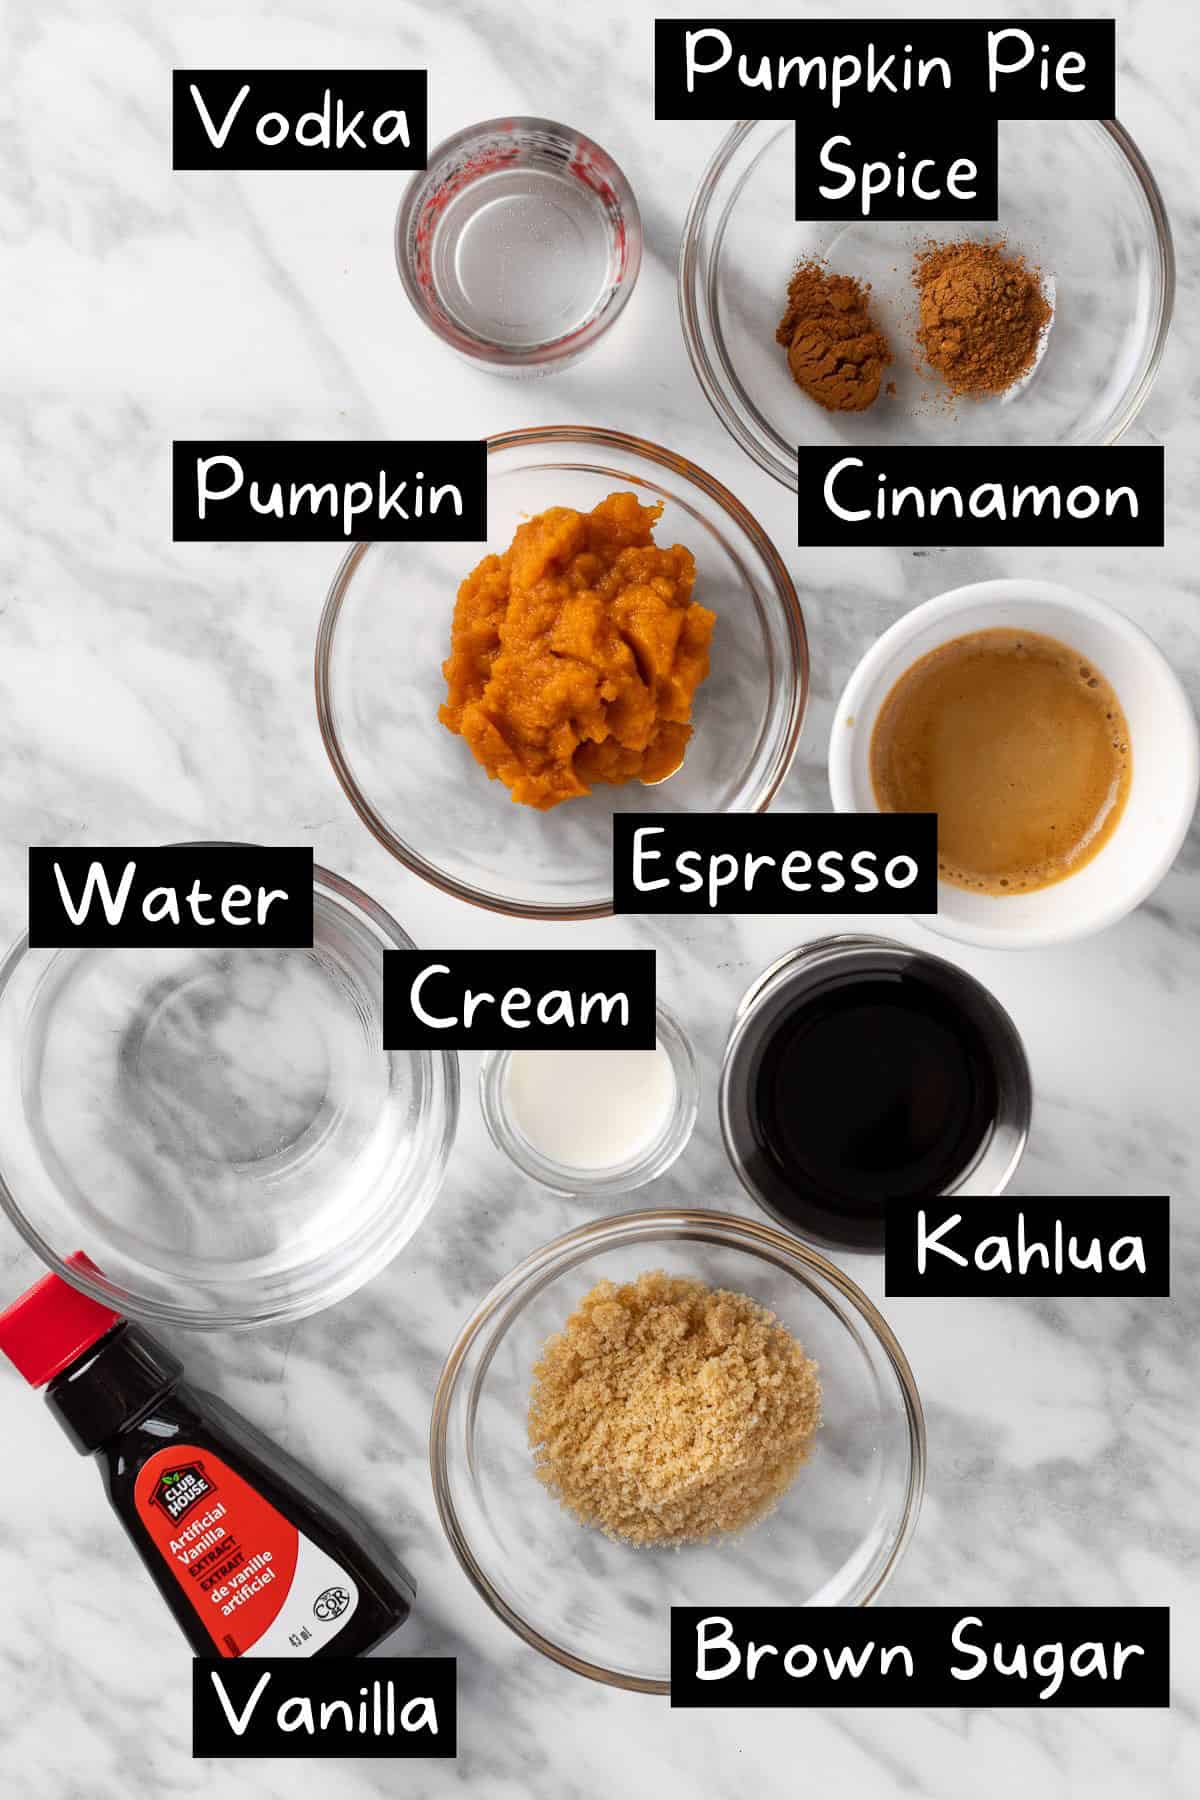 The ingredients needed to make the pumpkin spice espresso martini.